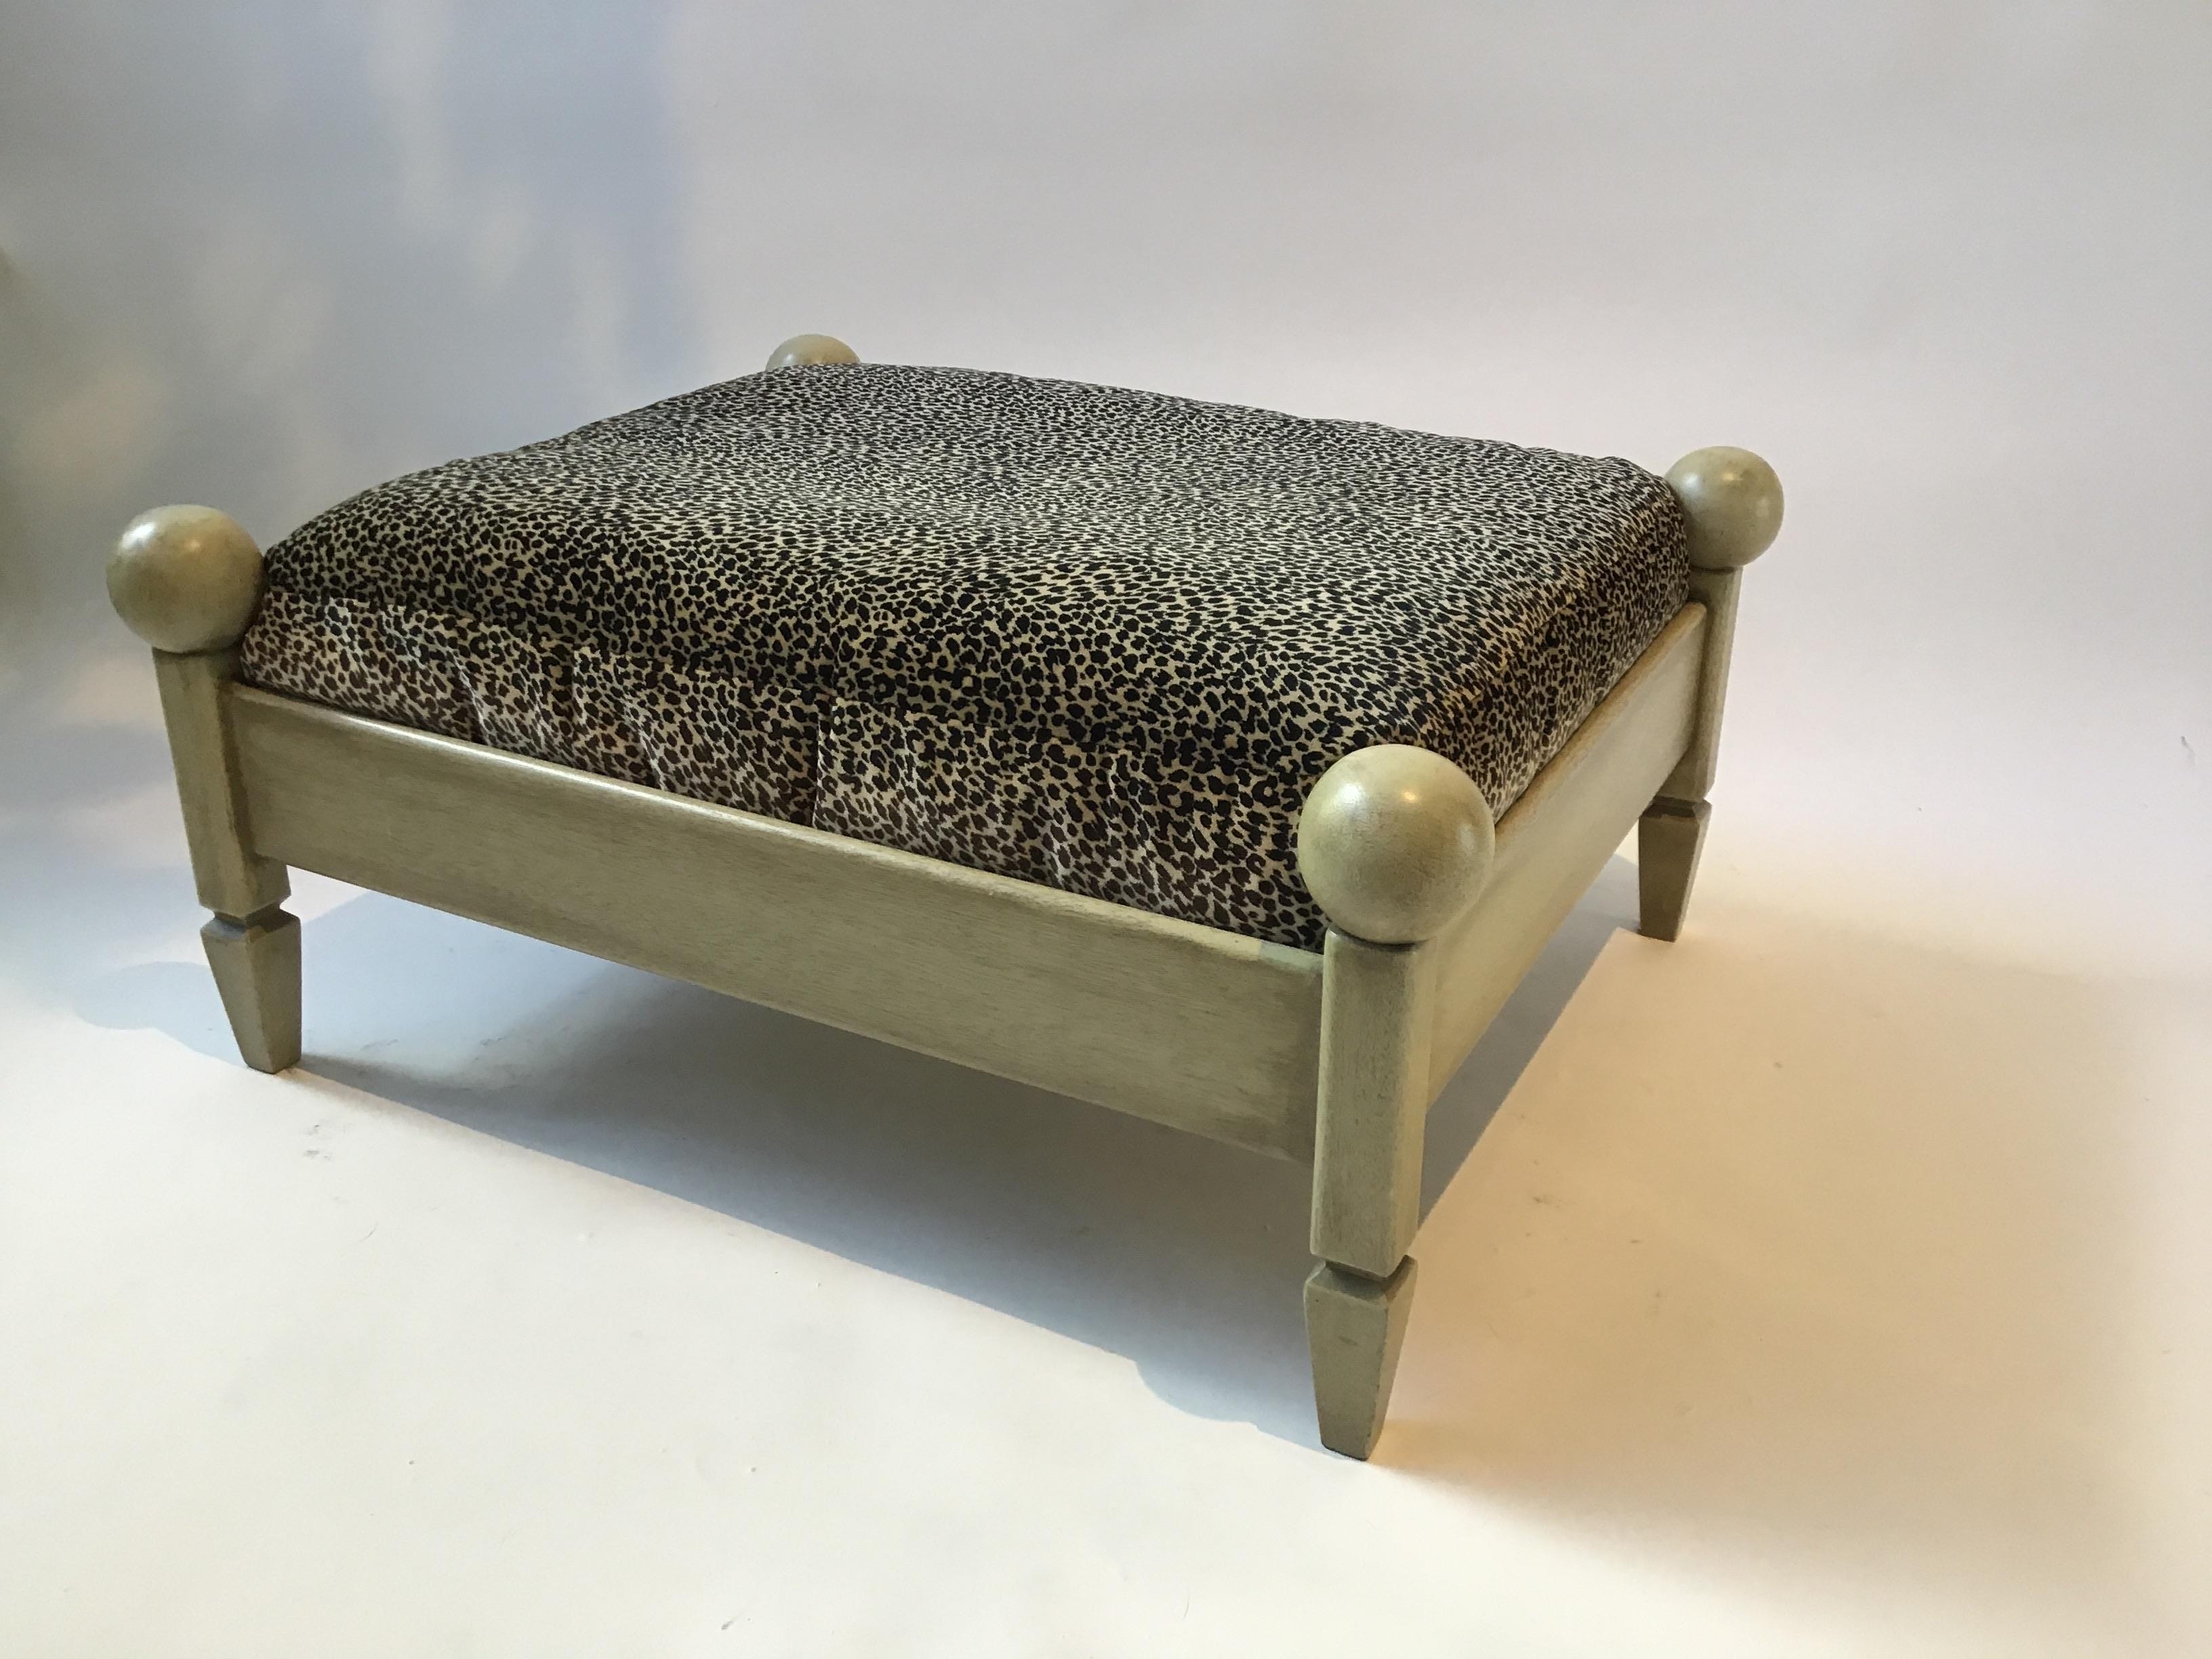 Classical wood dog bed. Fading from sun to cushion fabric.